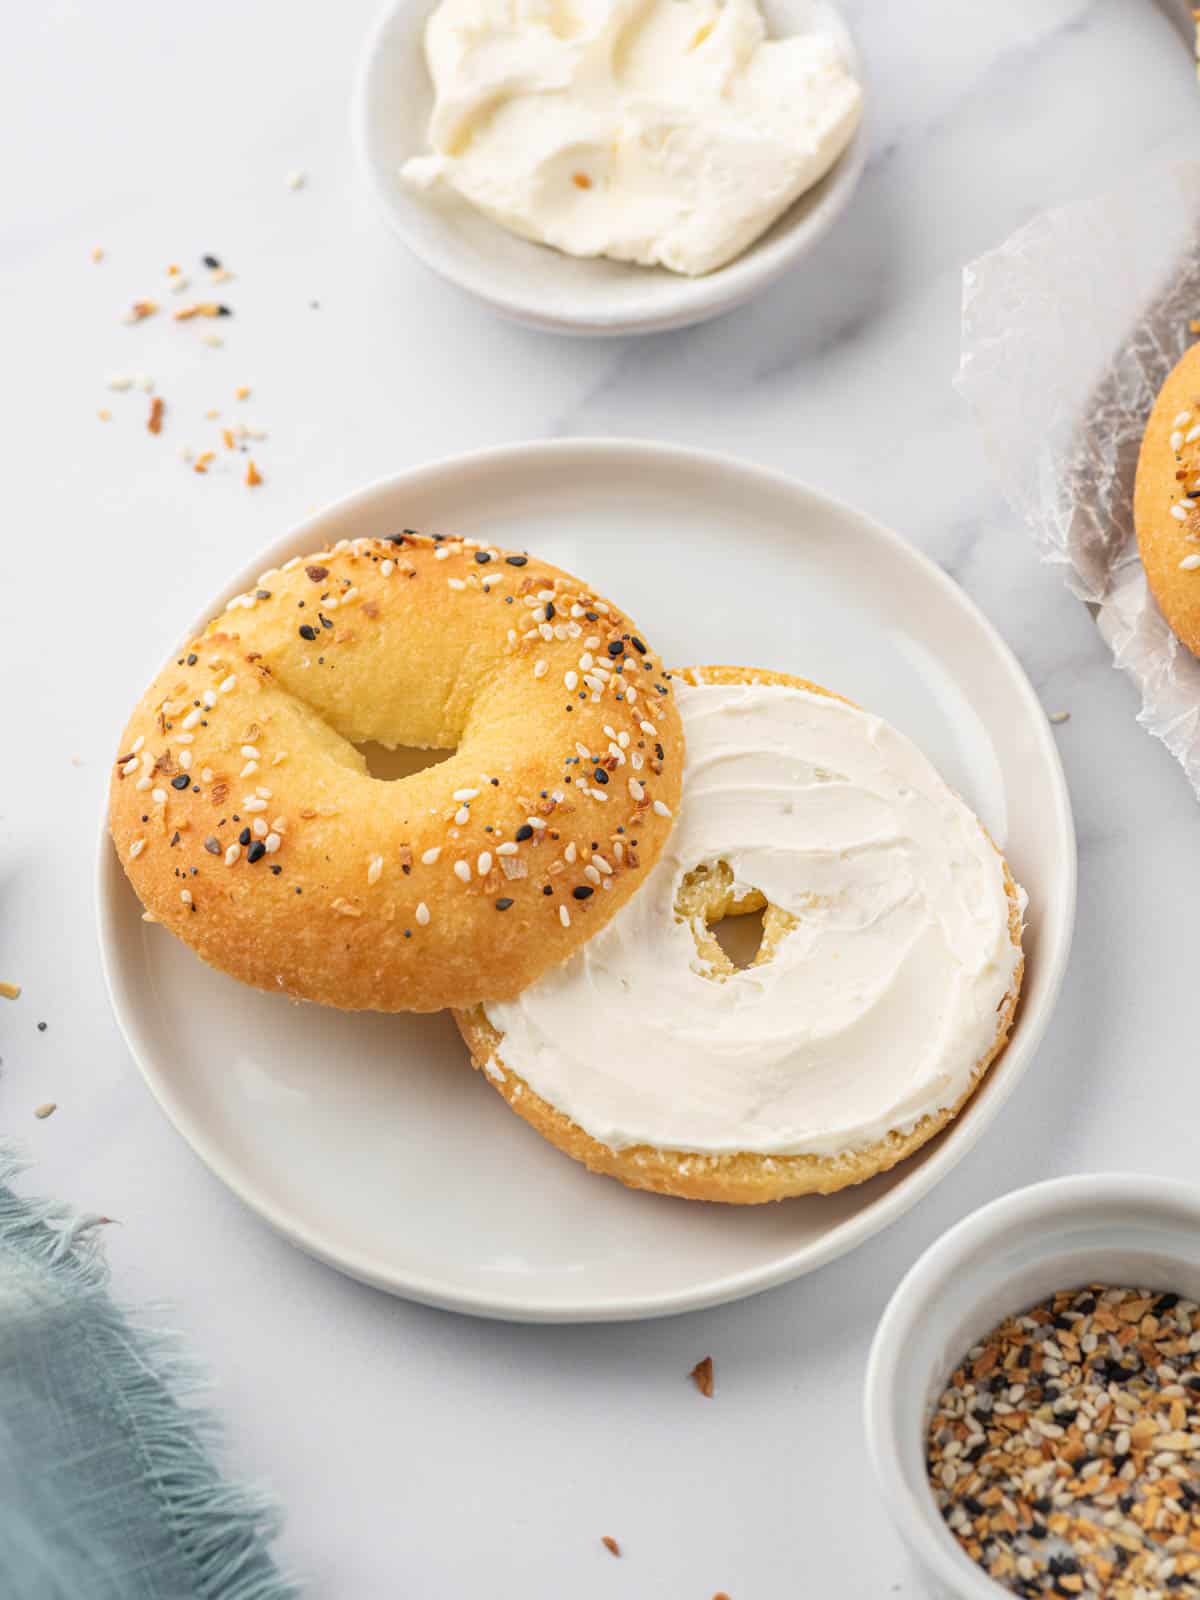 Low carb everything bagel sliced in half and smeared with cream cheese.